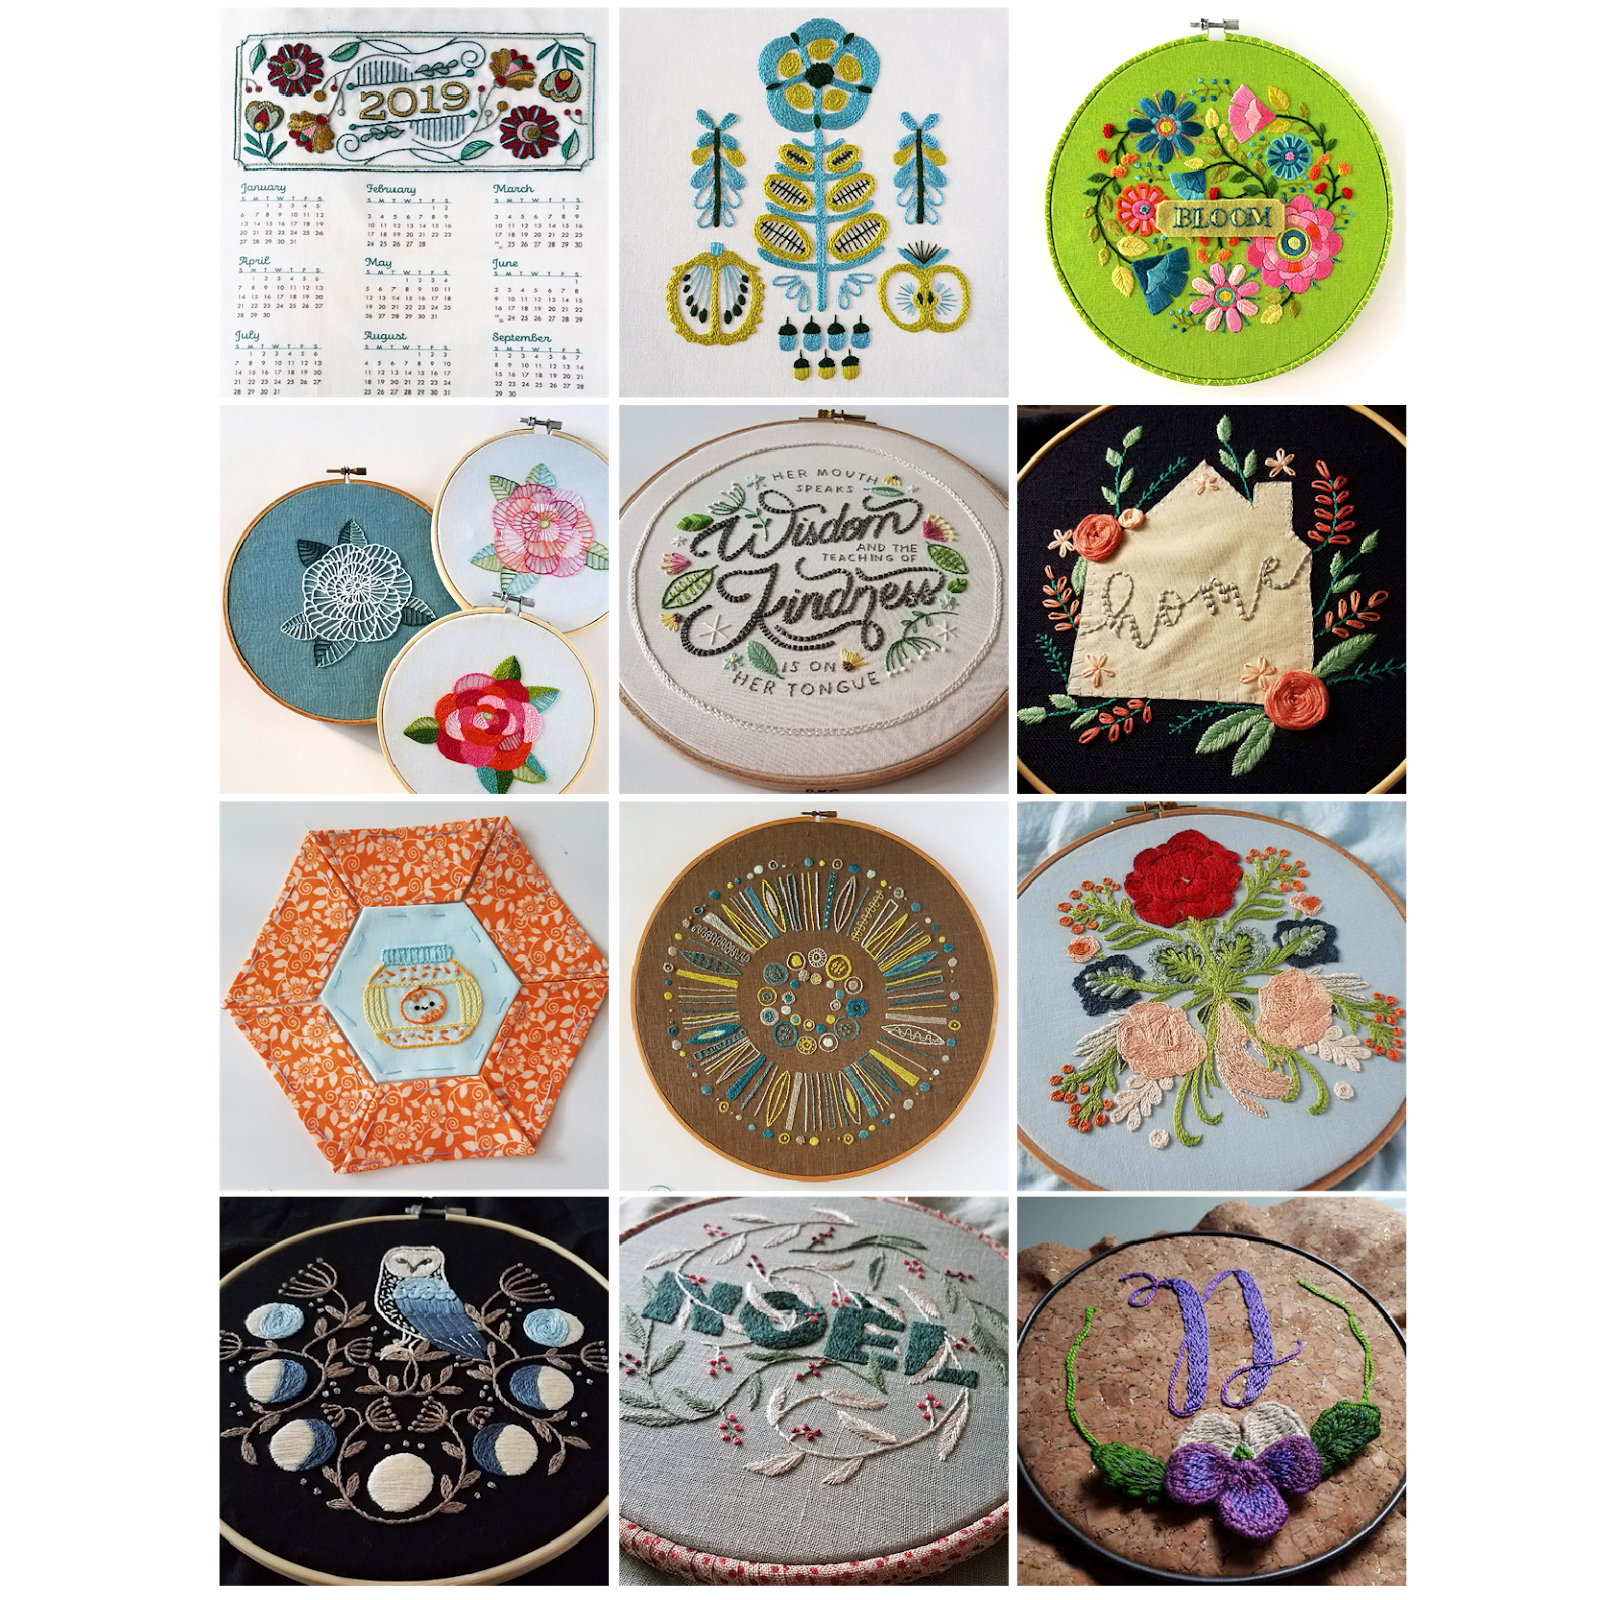 2019 year in review by floresita for Feeling Stitchy